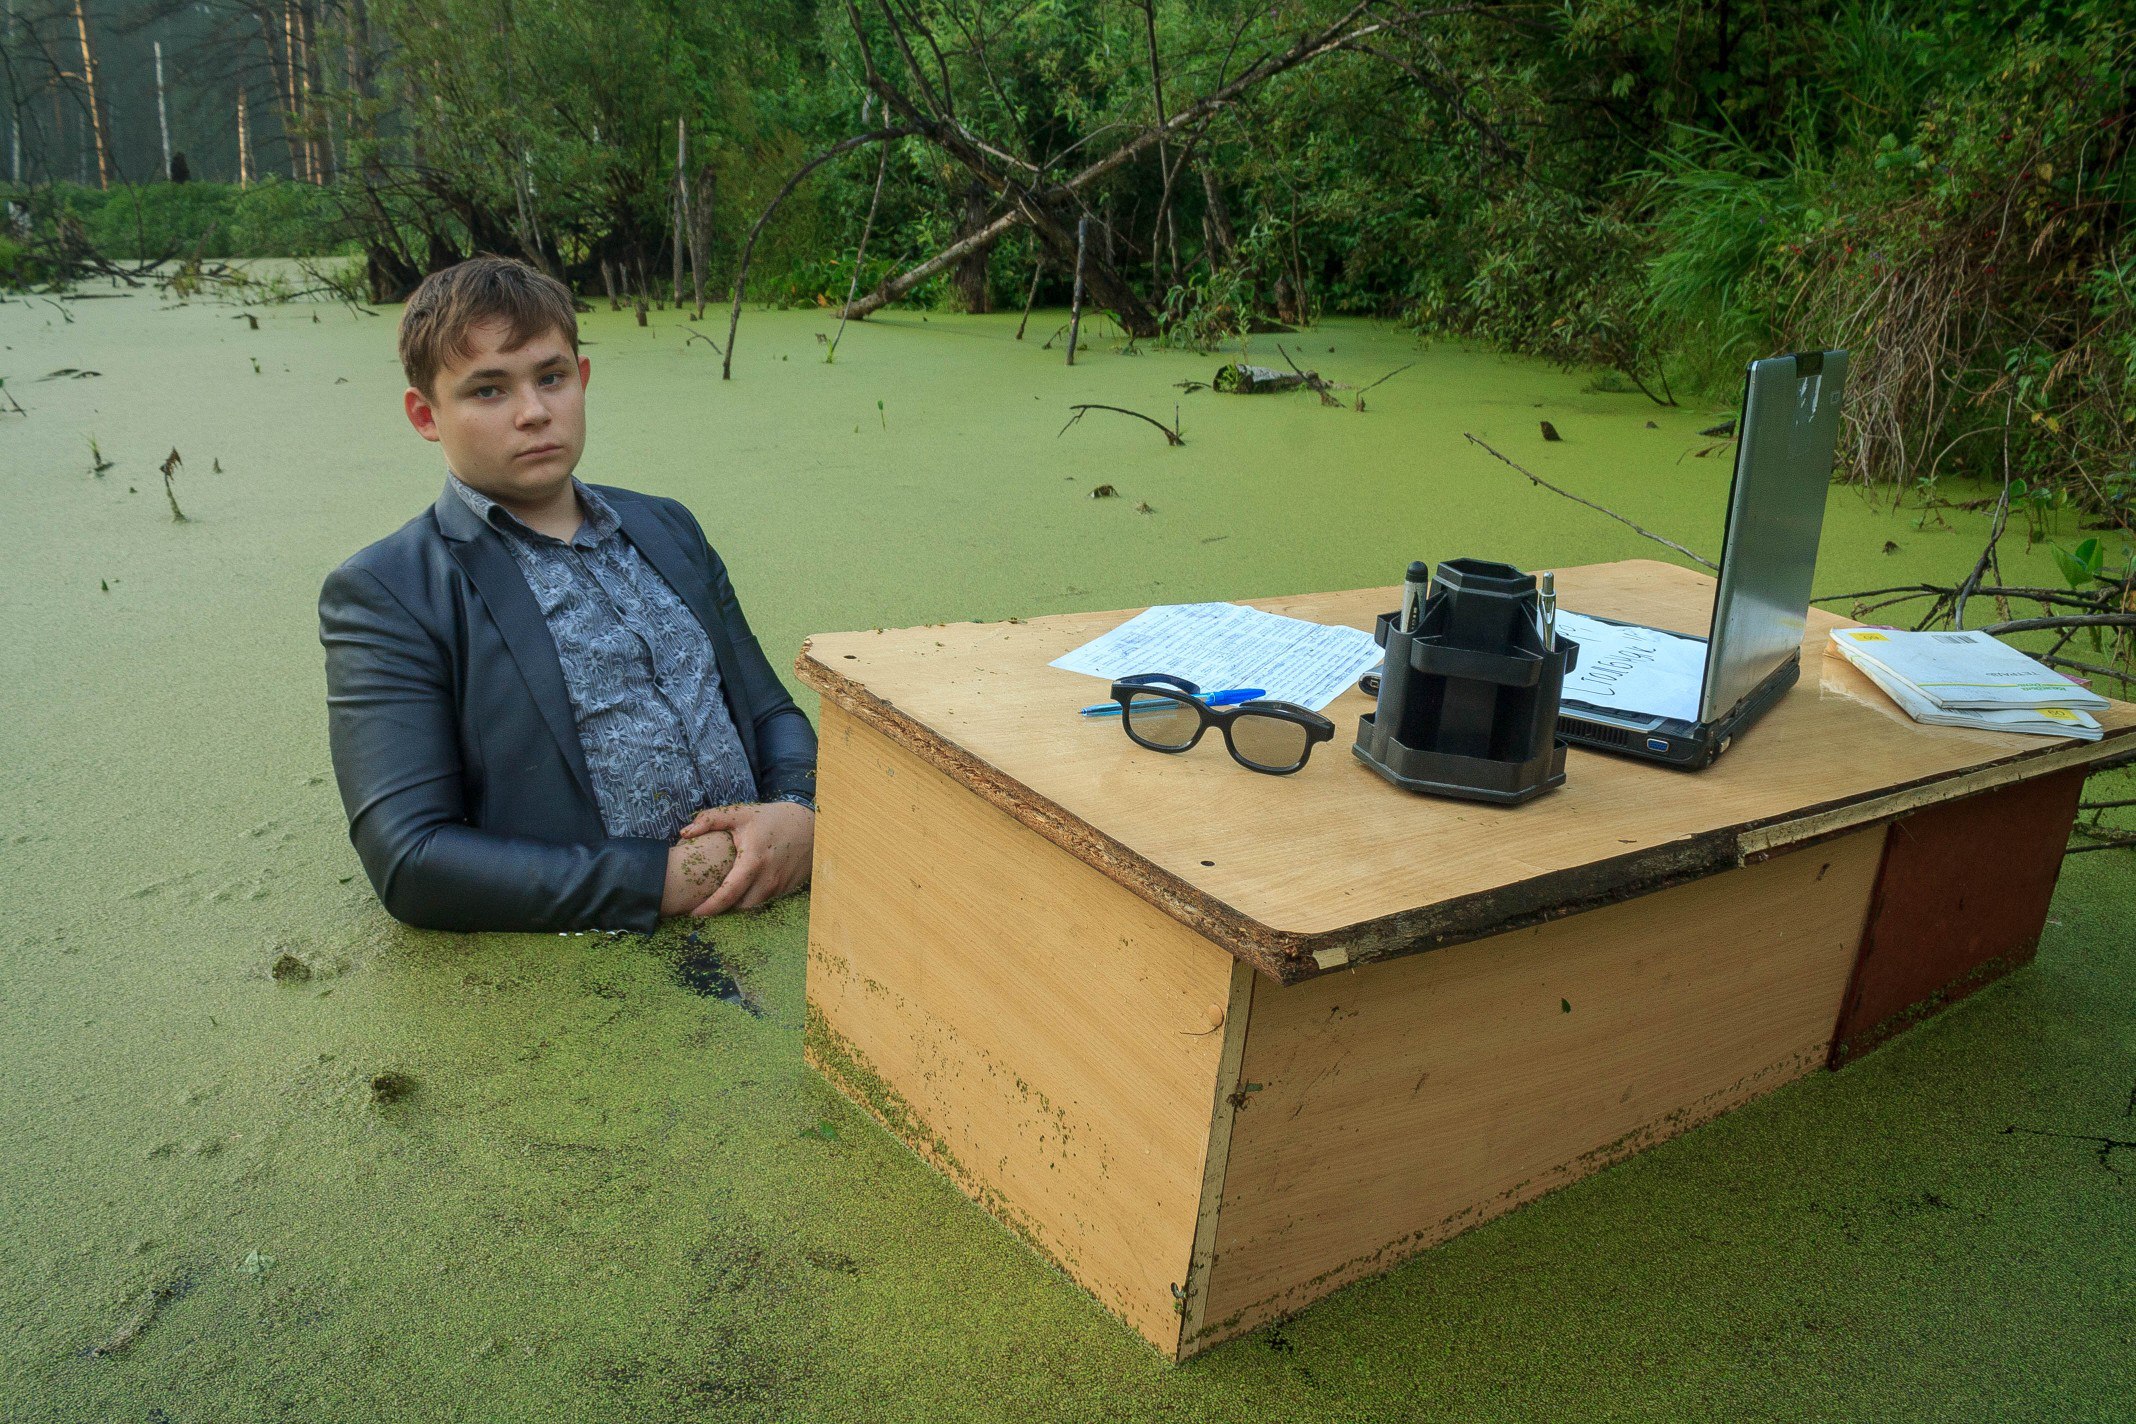 Russian schoolboy’s photo session in swamp goes viral